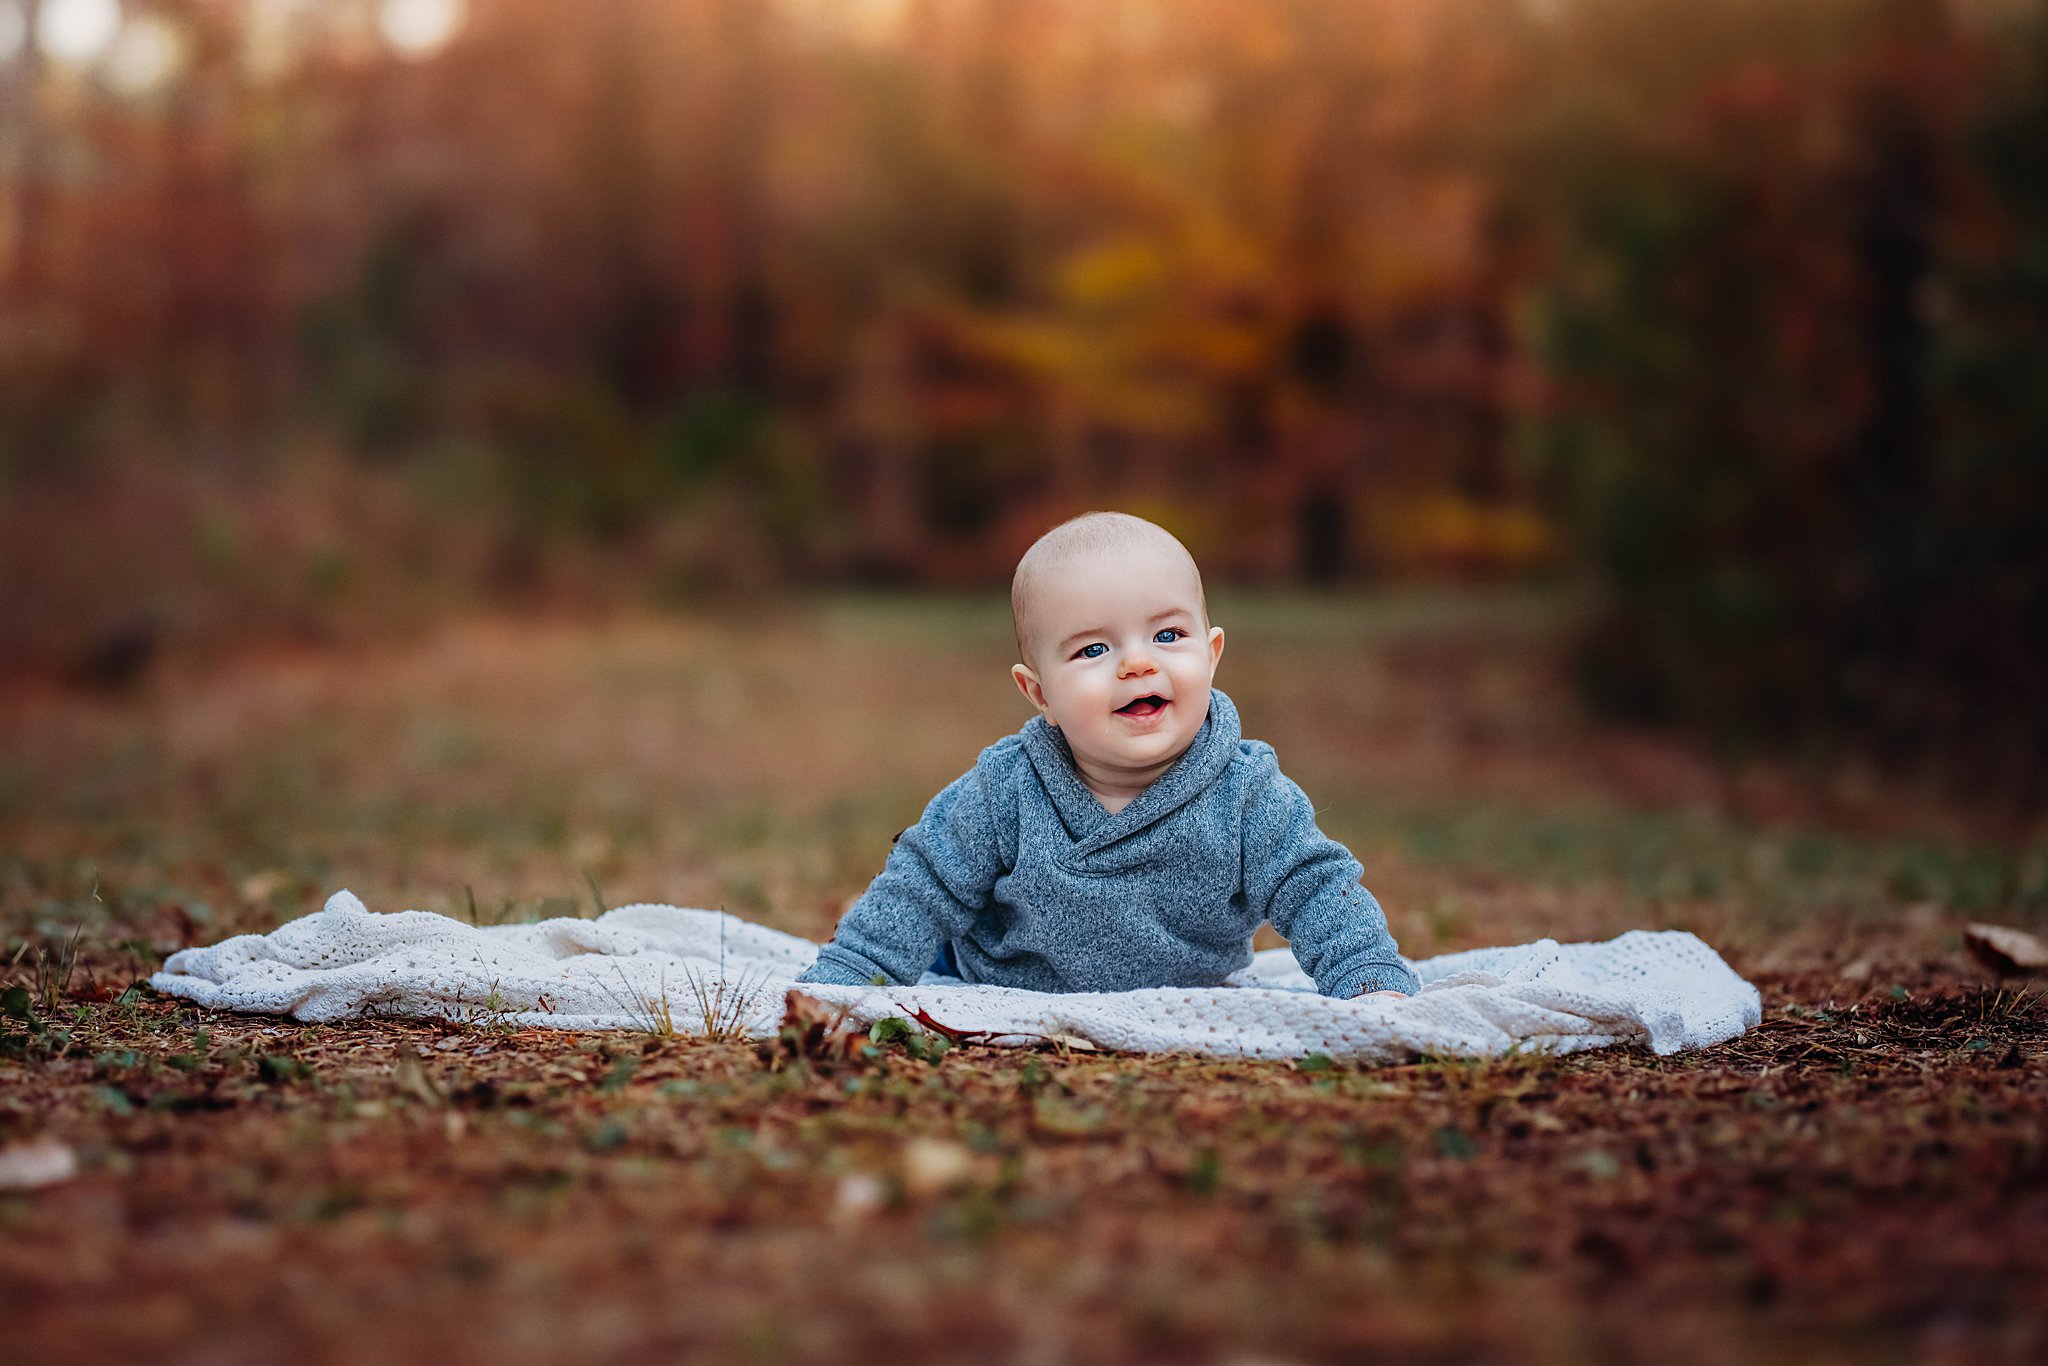 A toddler boy lays on a picnic blanket in a park in fall wearing a grey sweater raleigh pediatric dentists